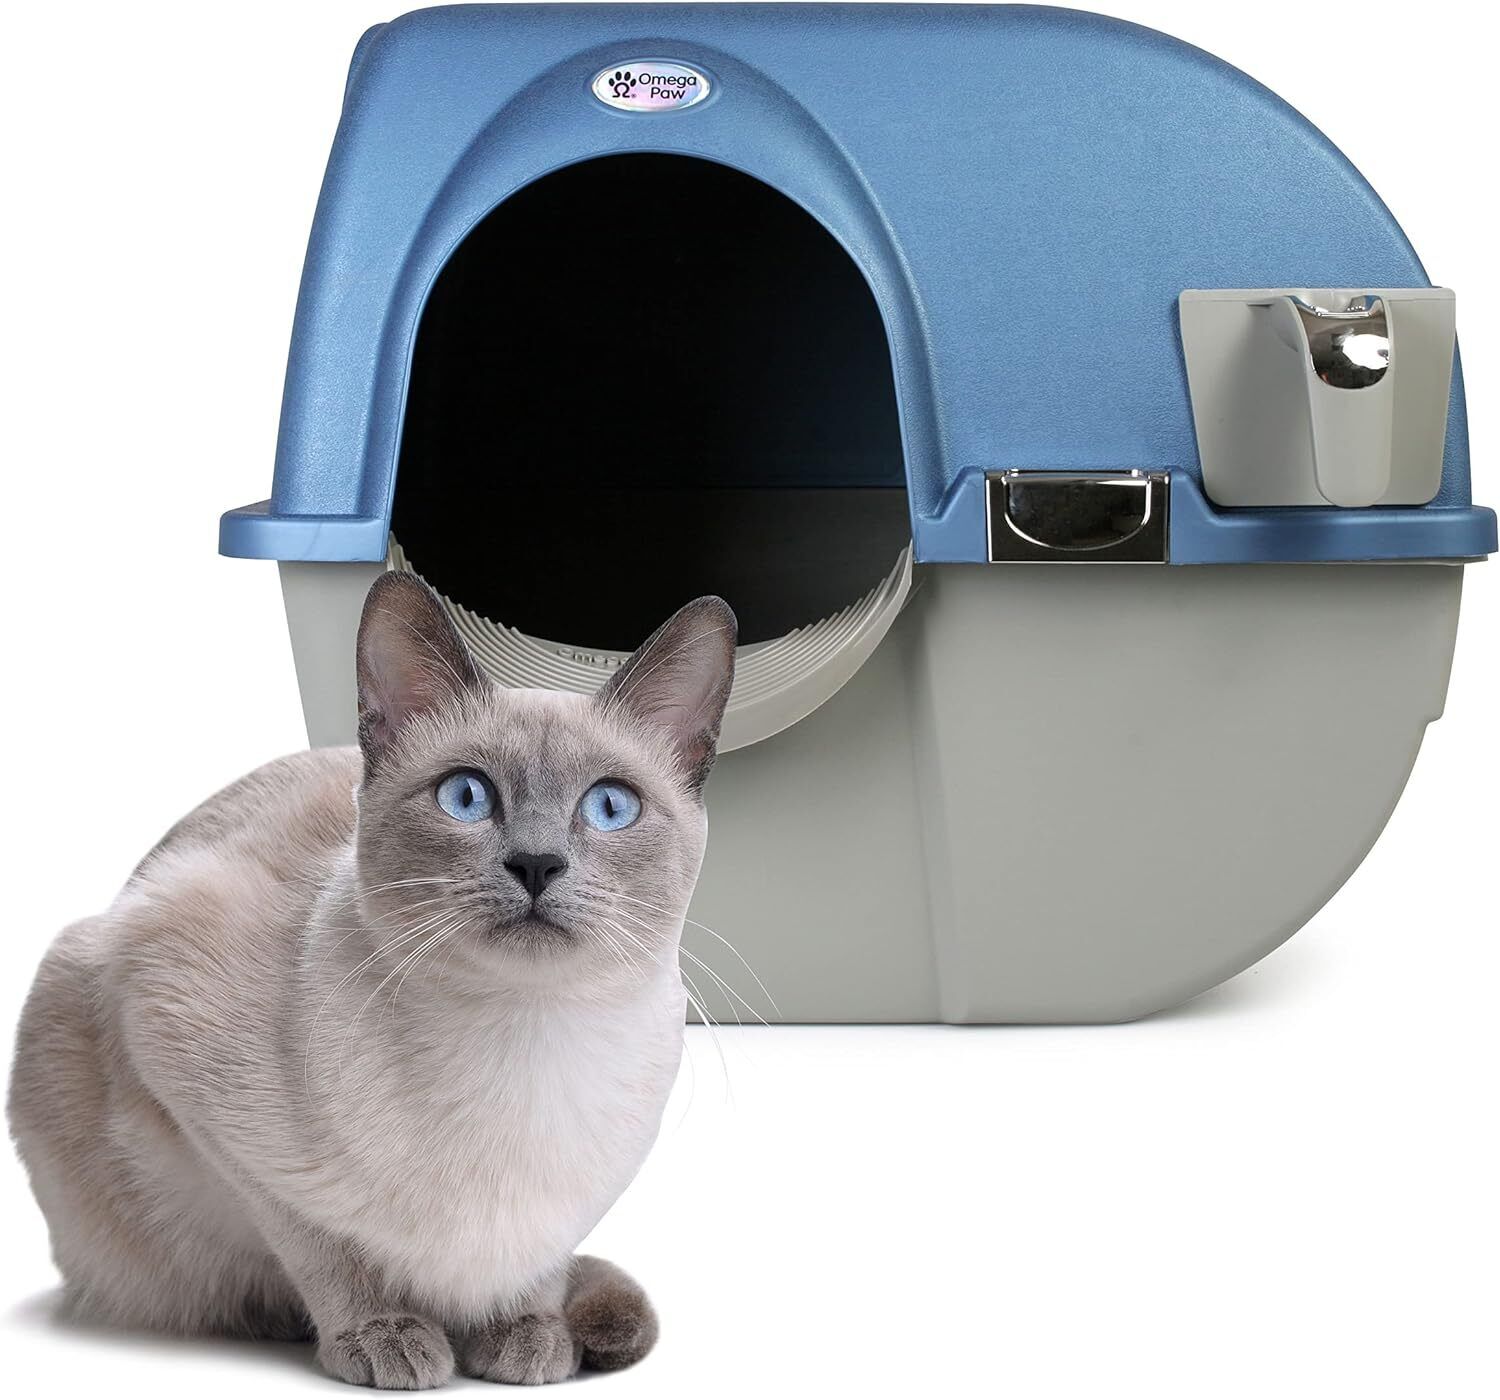 Omega Paw Premium Roll 'n Clean Litter Box Large,Cat, Peral Blue (PR-RA20-1) Does not apply - фотография #3